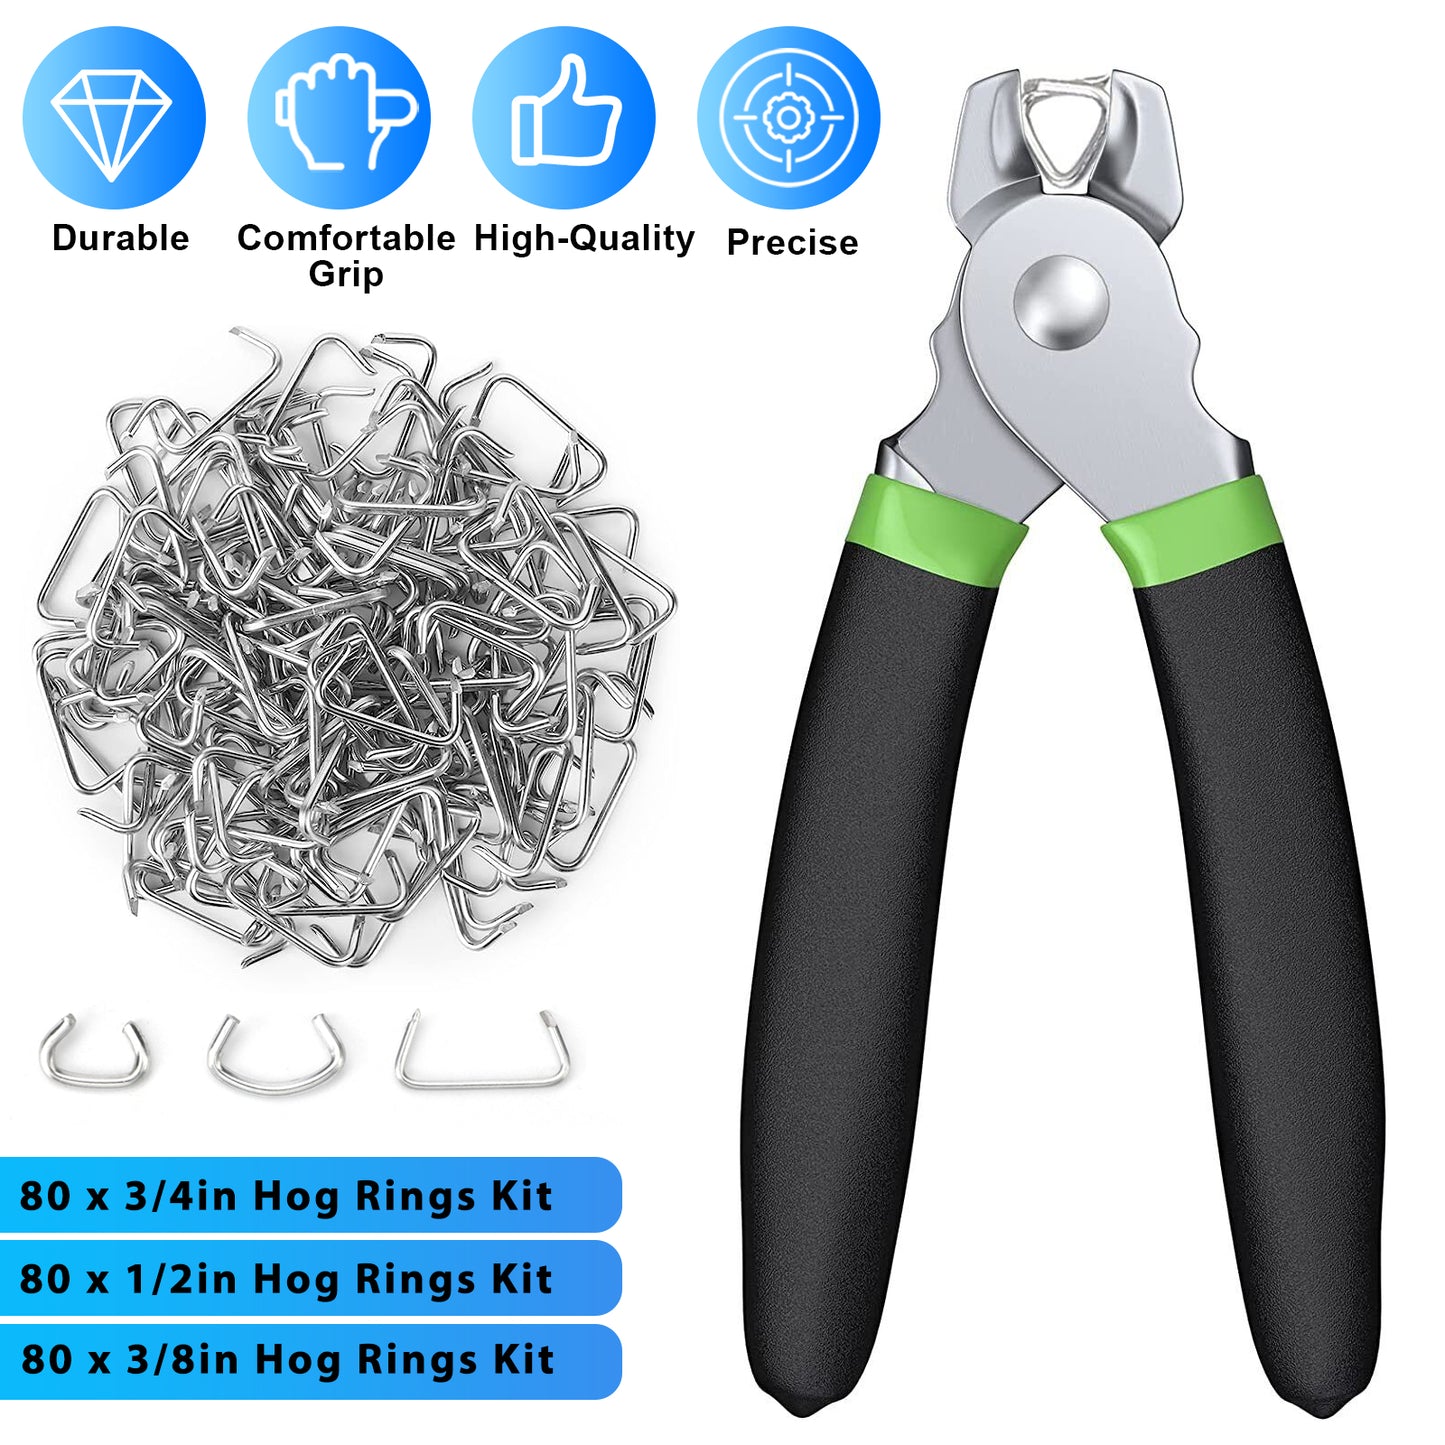 Hog Ring Pliers Set - Durable Steel Pliers and 240 Hog Rings, Cushioned Handles, Multiple Sizes for Versatile Use